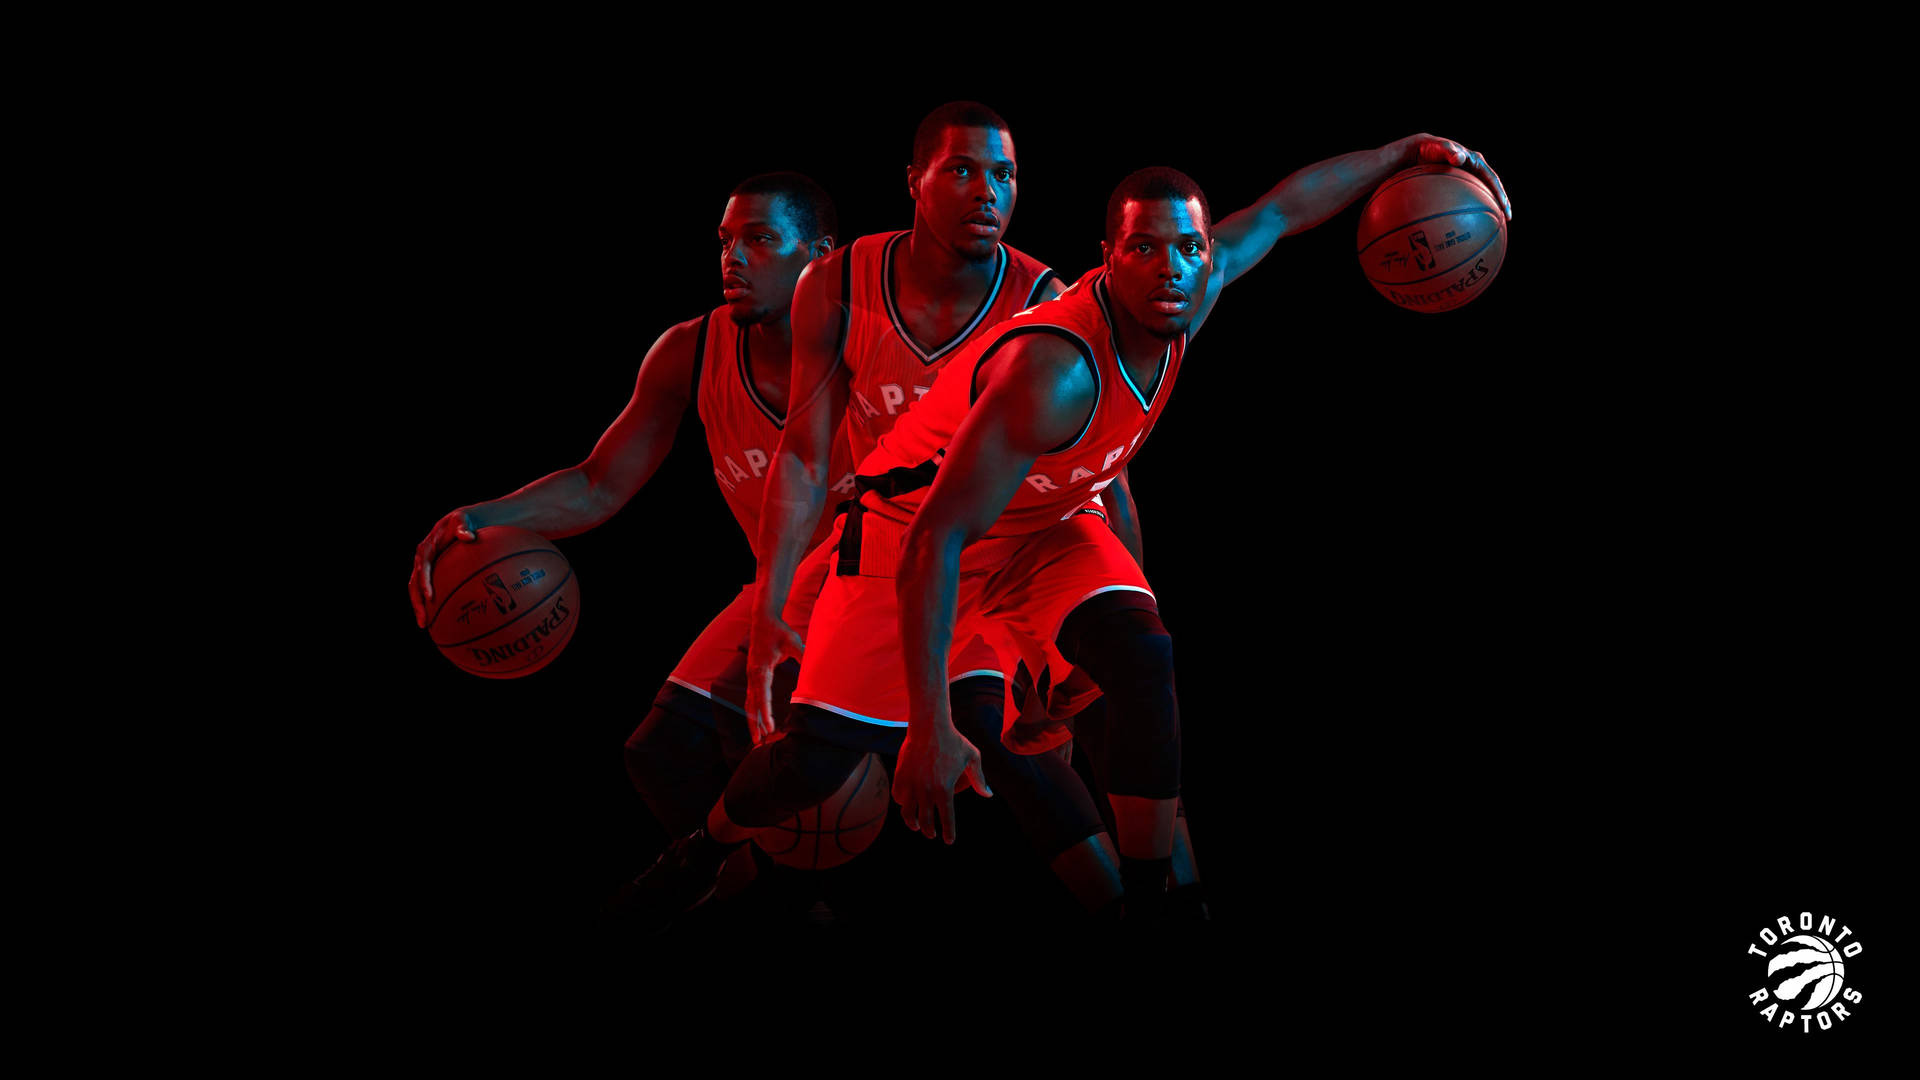 100+] Kyle Lowry Wallpapers